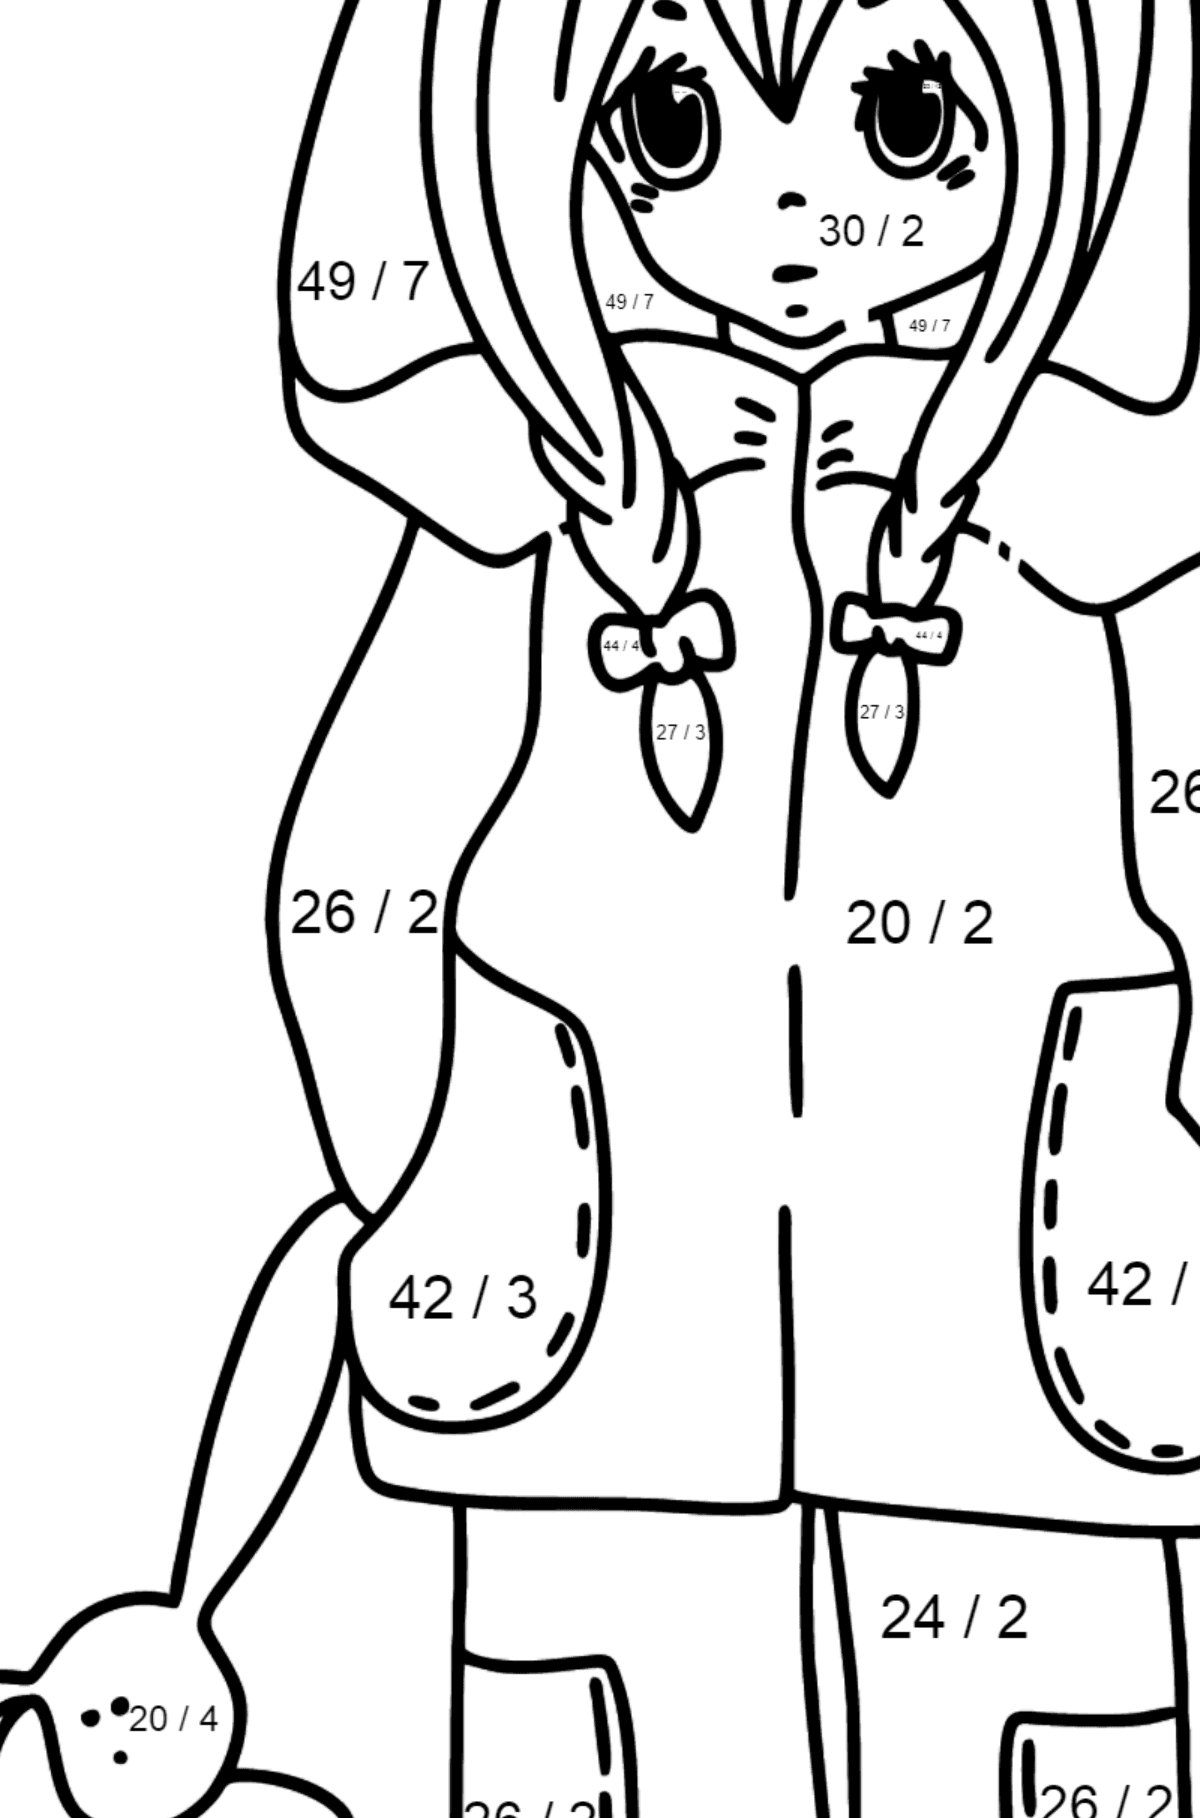 Anime girl with pigtails coloring page - Math Coloring - Division for Kids